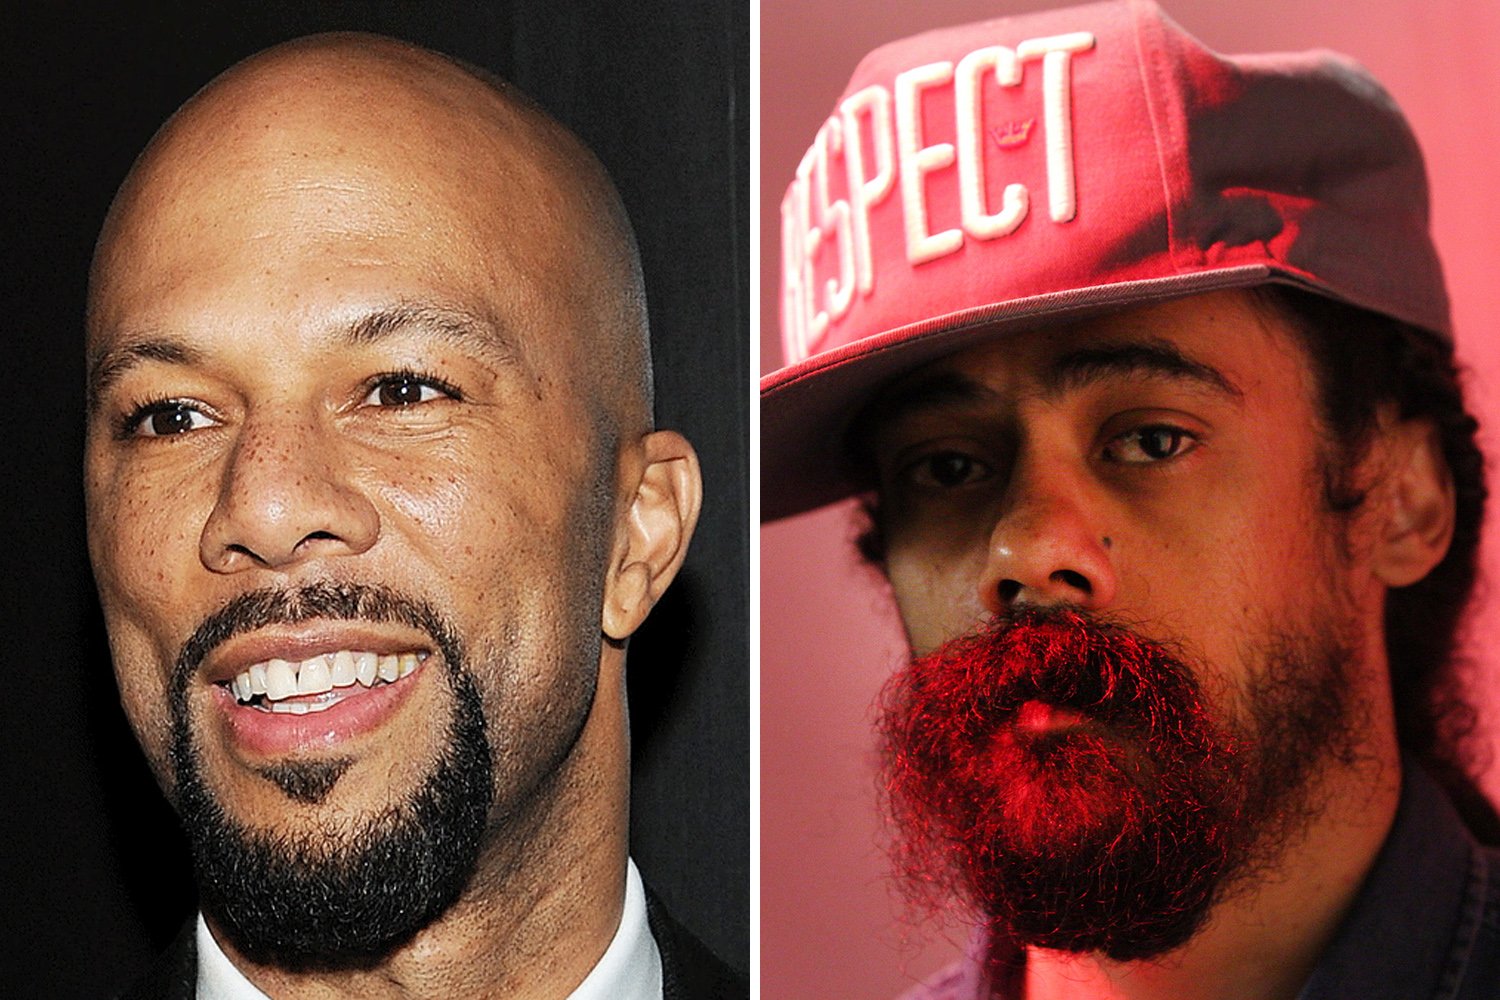 damian-marley-brings-reggae-vibes-to-rapper-common-s-what-do-you-say